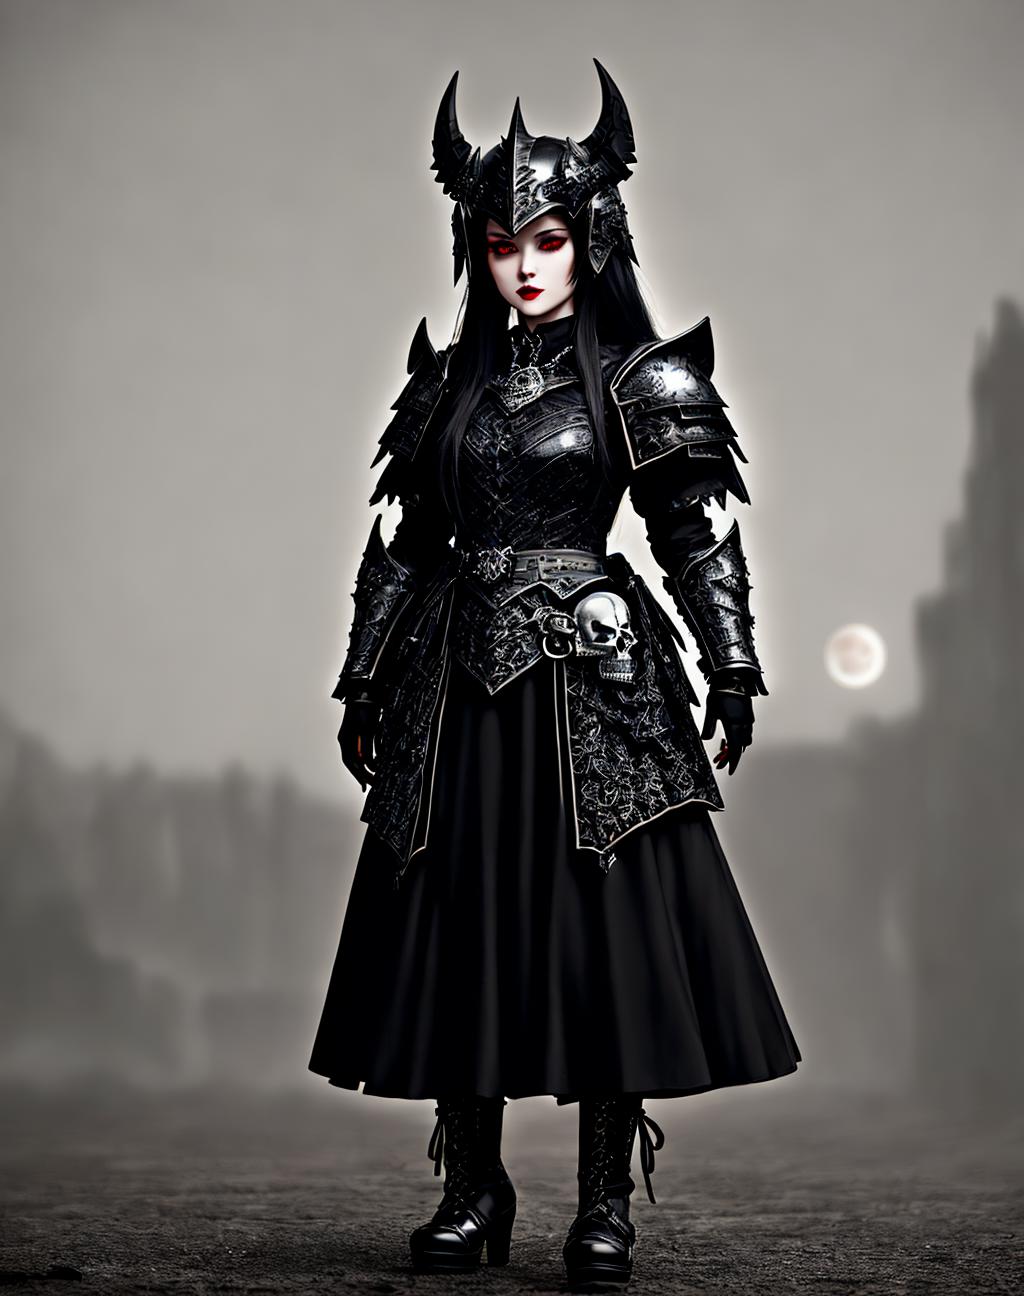 Goth Gal - Armored image by EDG